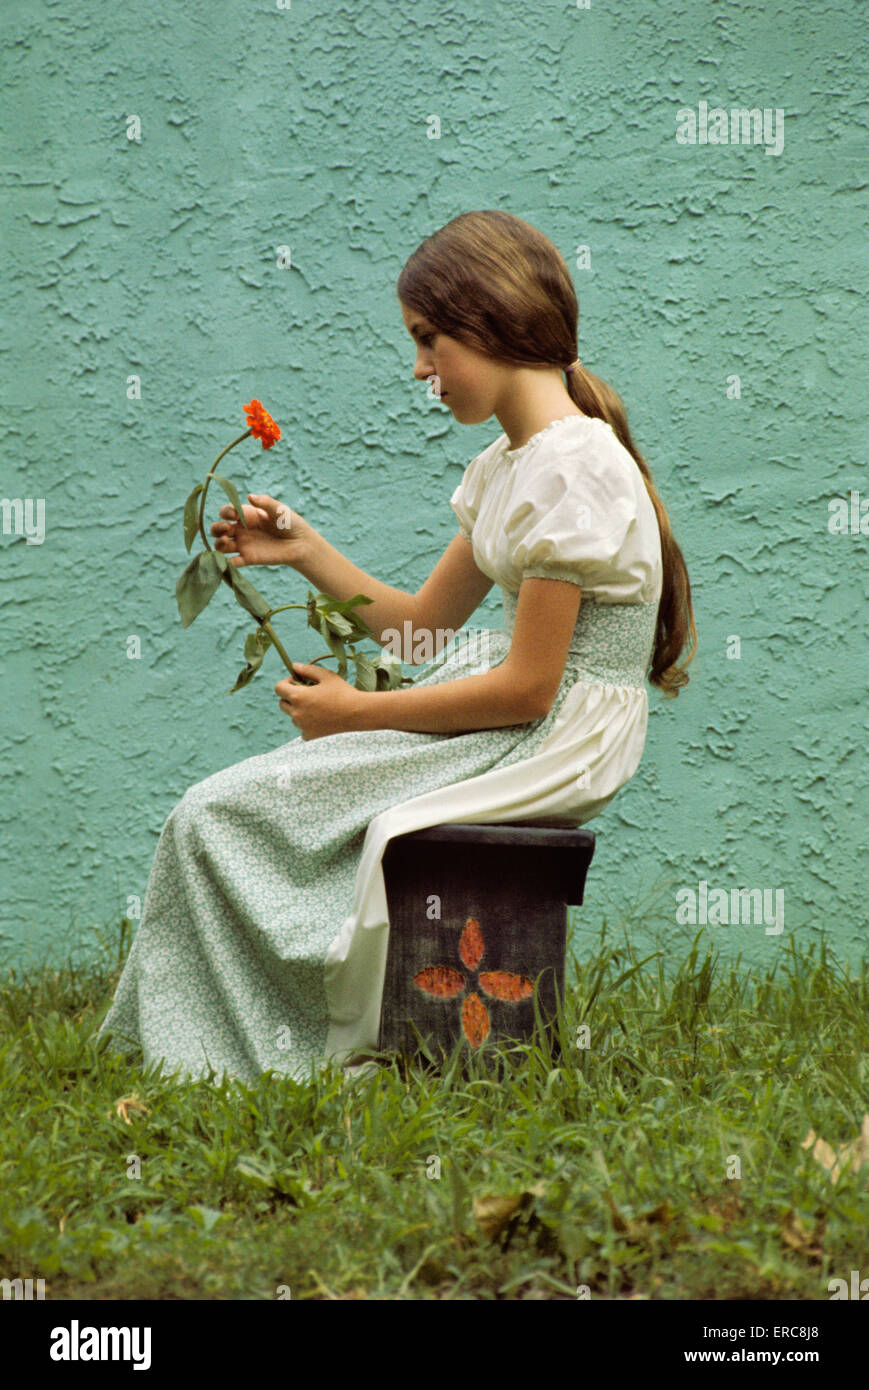 1960s PENSIVE YOUNG TEENAGE GIRL HOLDING LONG STEM FLOWER SITTING BENCH OUTDOORS PROFILE WEARING GRANNY DRESS Stock Photo